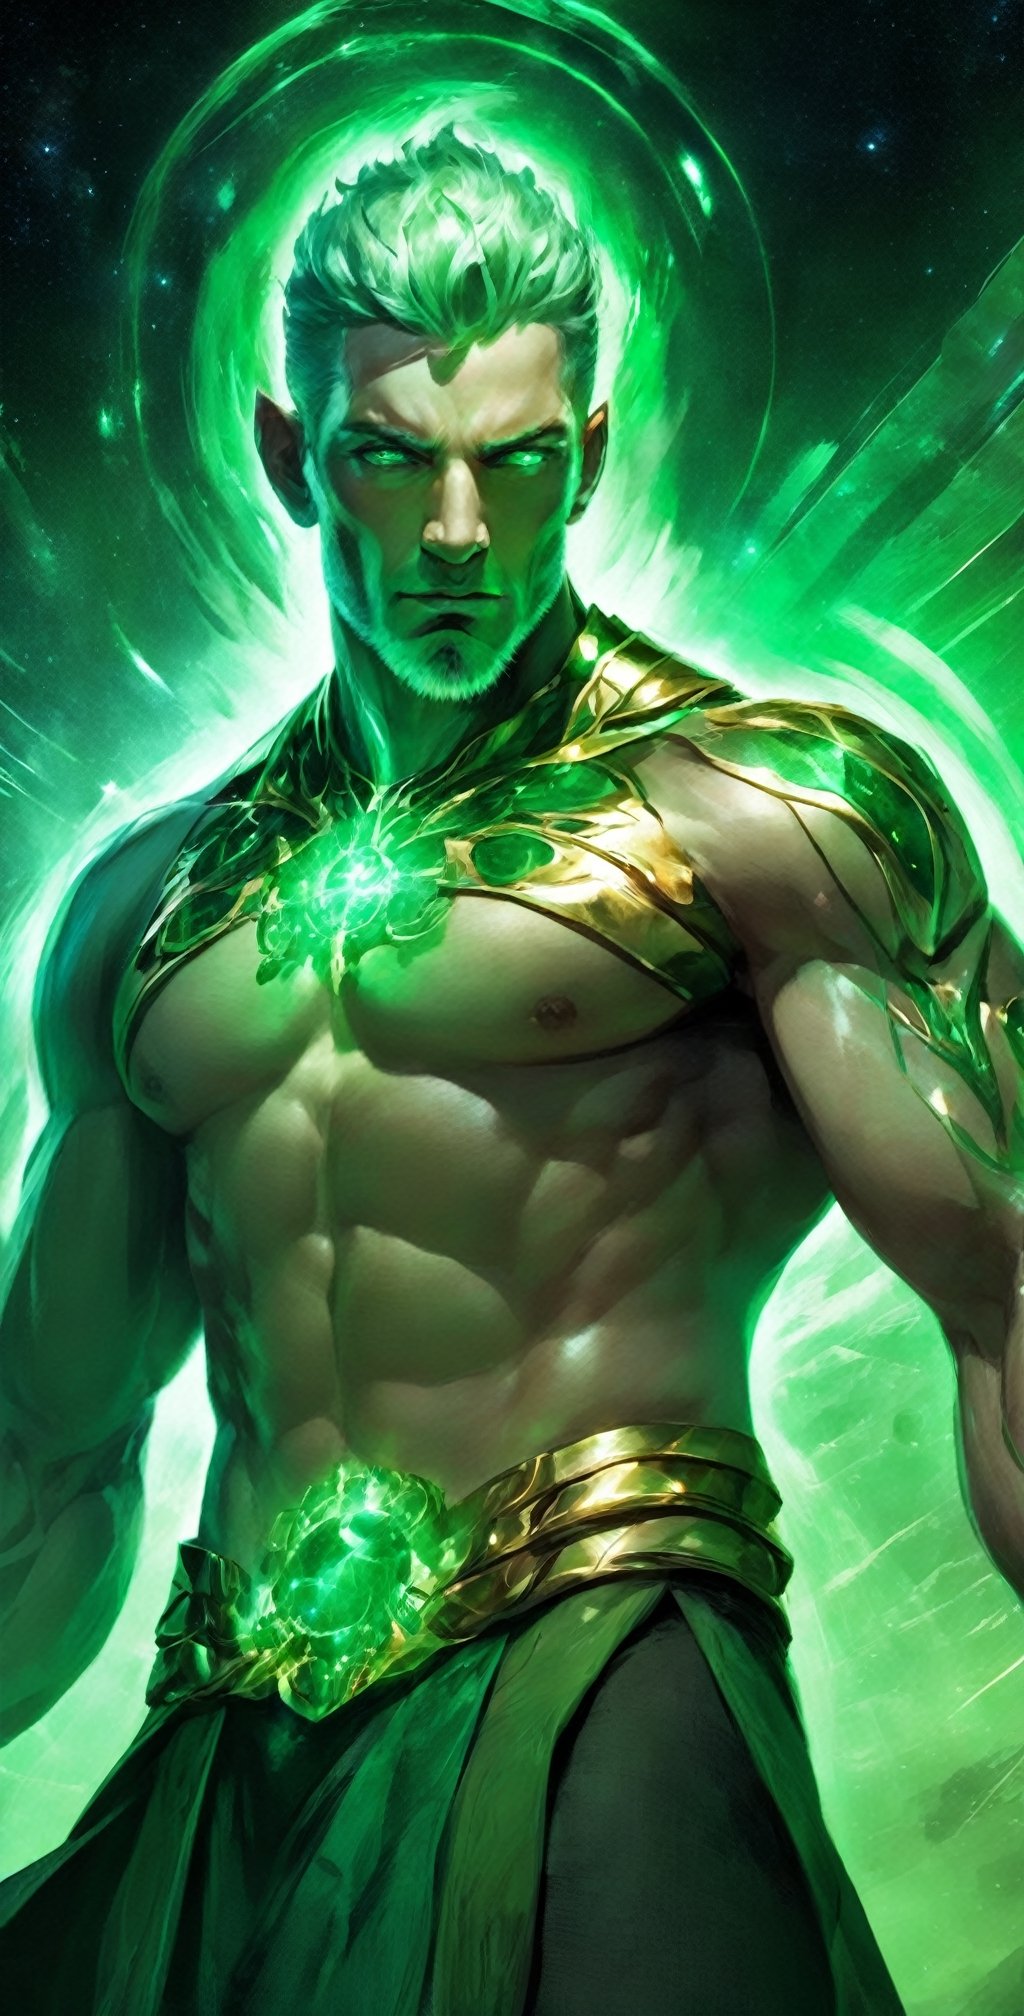 Visualize a Lenkaizm art style, avatar, 1 old man, manly character, ethereal form, perfect anatomy, detailed face, perfect eye, superhero, short spike green hair, emerald_beard,facial_hair, detailed muscular body, dynamic pose, tribal, highest quality, 8K, hyperdetail, looking at viewer, standing symetrical, mixed emerald element, shiny_skin, depicting a emerald digital artificial intelligent entity, Lenkaizm style, photon energy veins, swirling liquid form of digital data, portrait, fisheye, medium shining light, glowing skin, bioluminescence entity, archaic, absolute masterpiece,EpicSky,Movie Still, planet earth in the background,cloud,gold_trim,claws,torn_cape